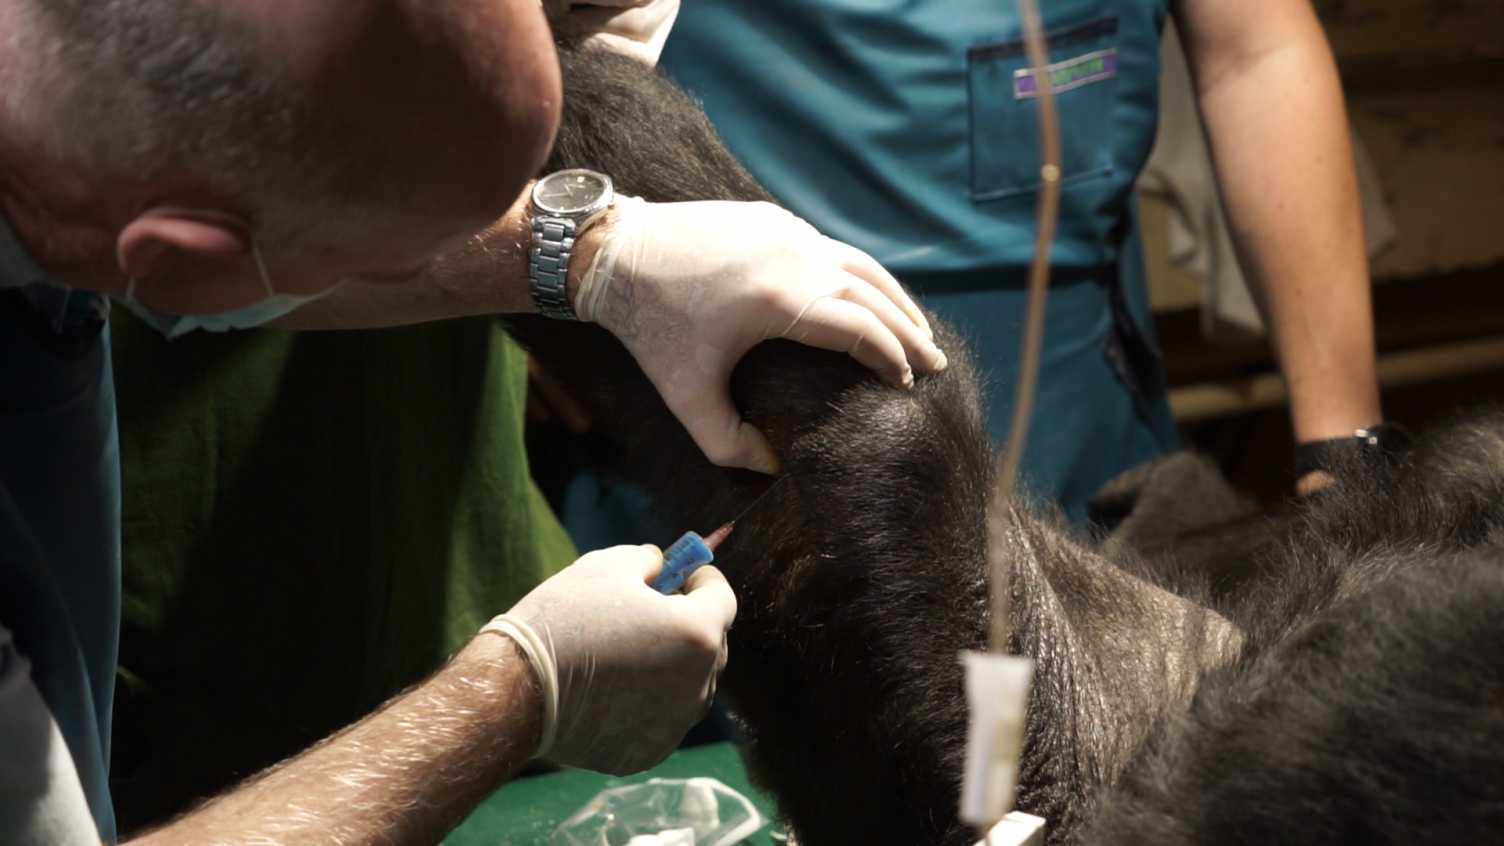 Thumbnail for Stem cells used to successfully treat arthritis in gorilla at Budapest zoo | New…